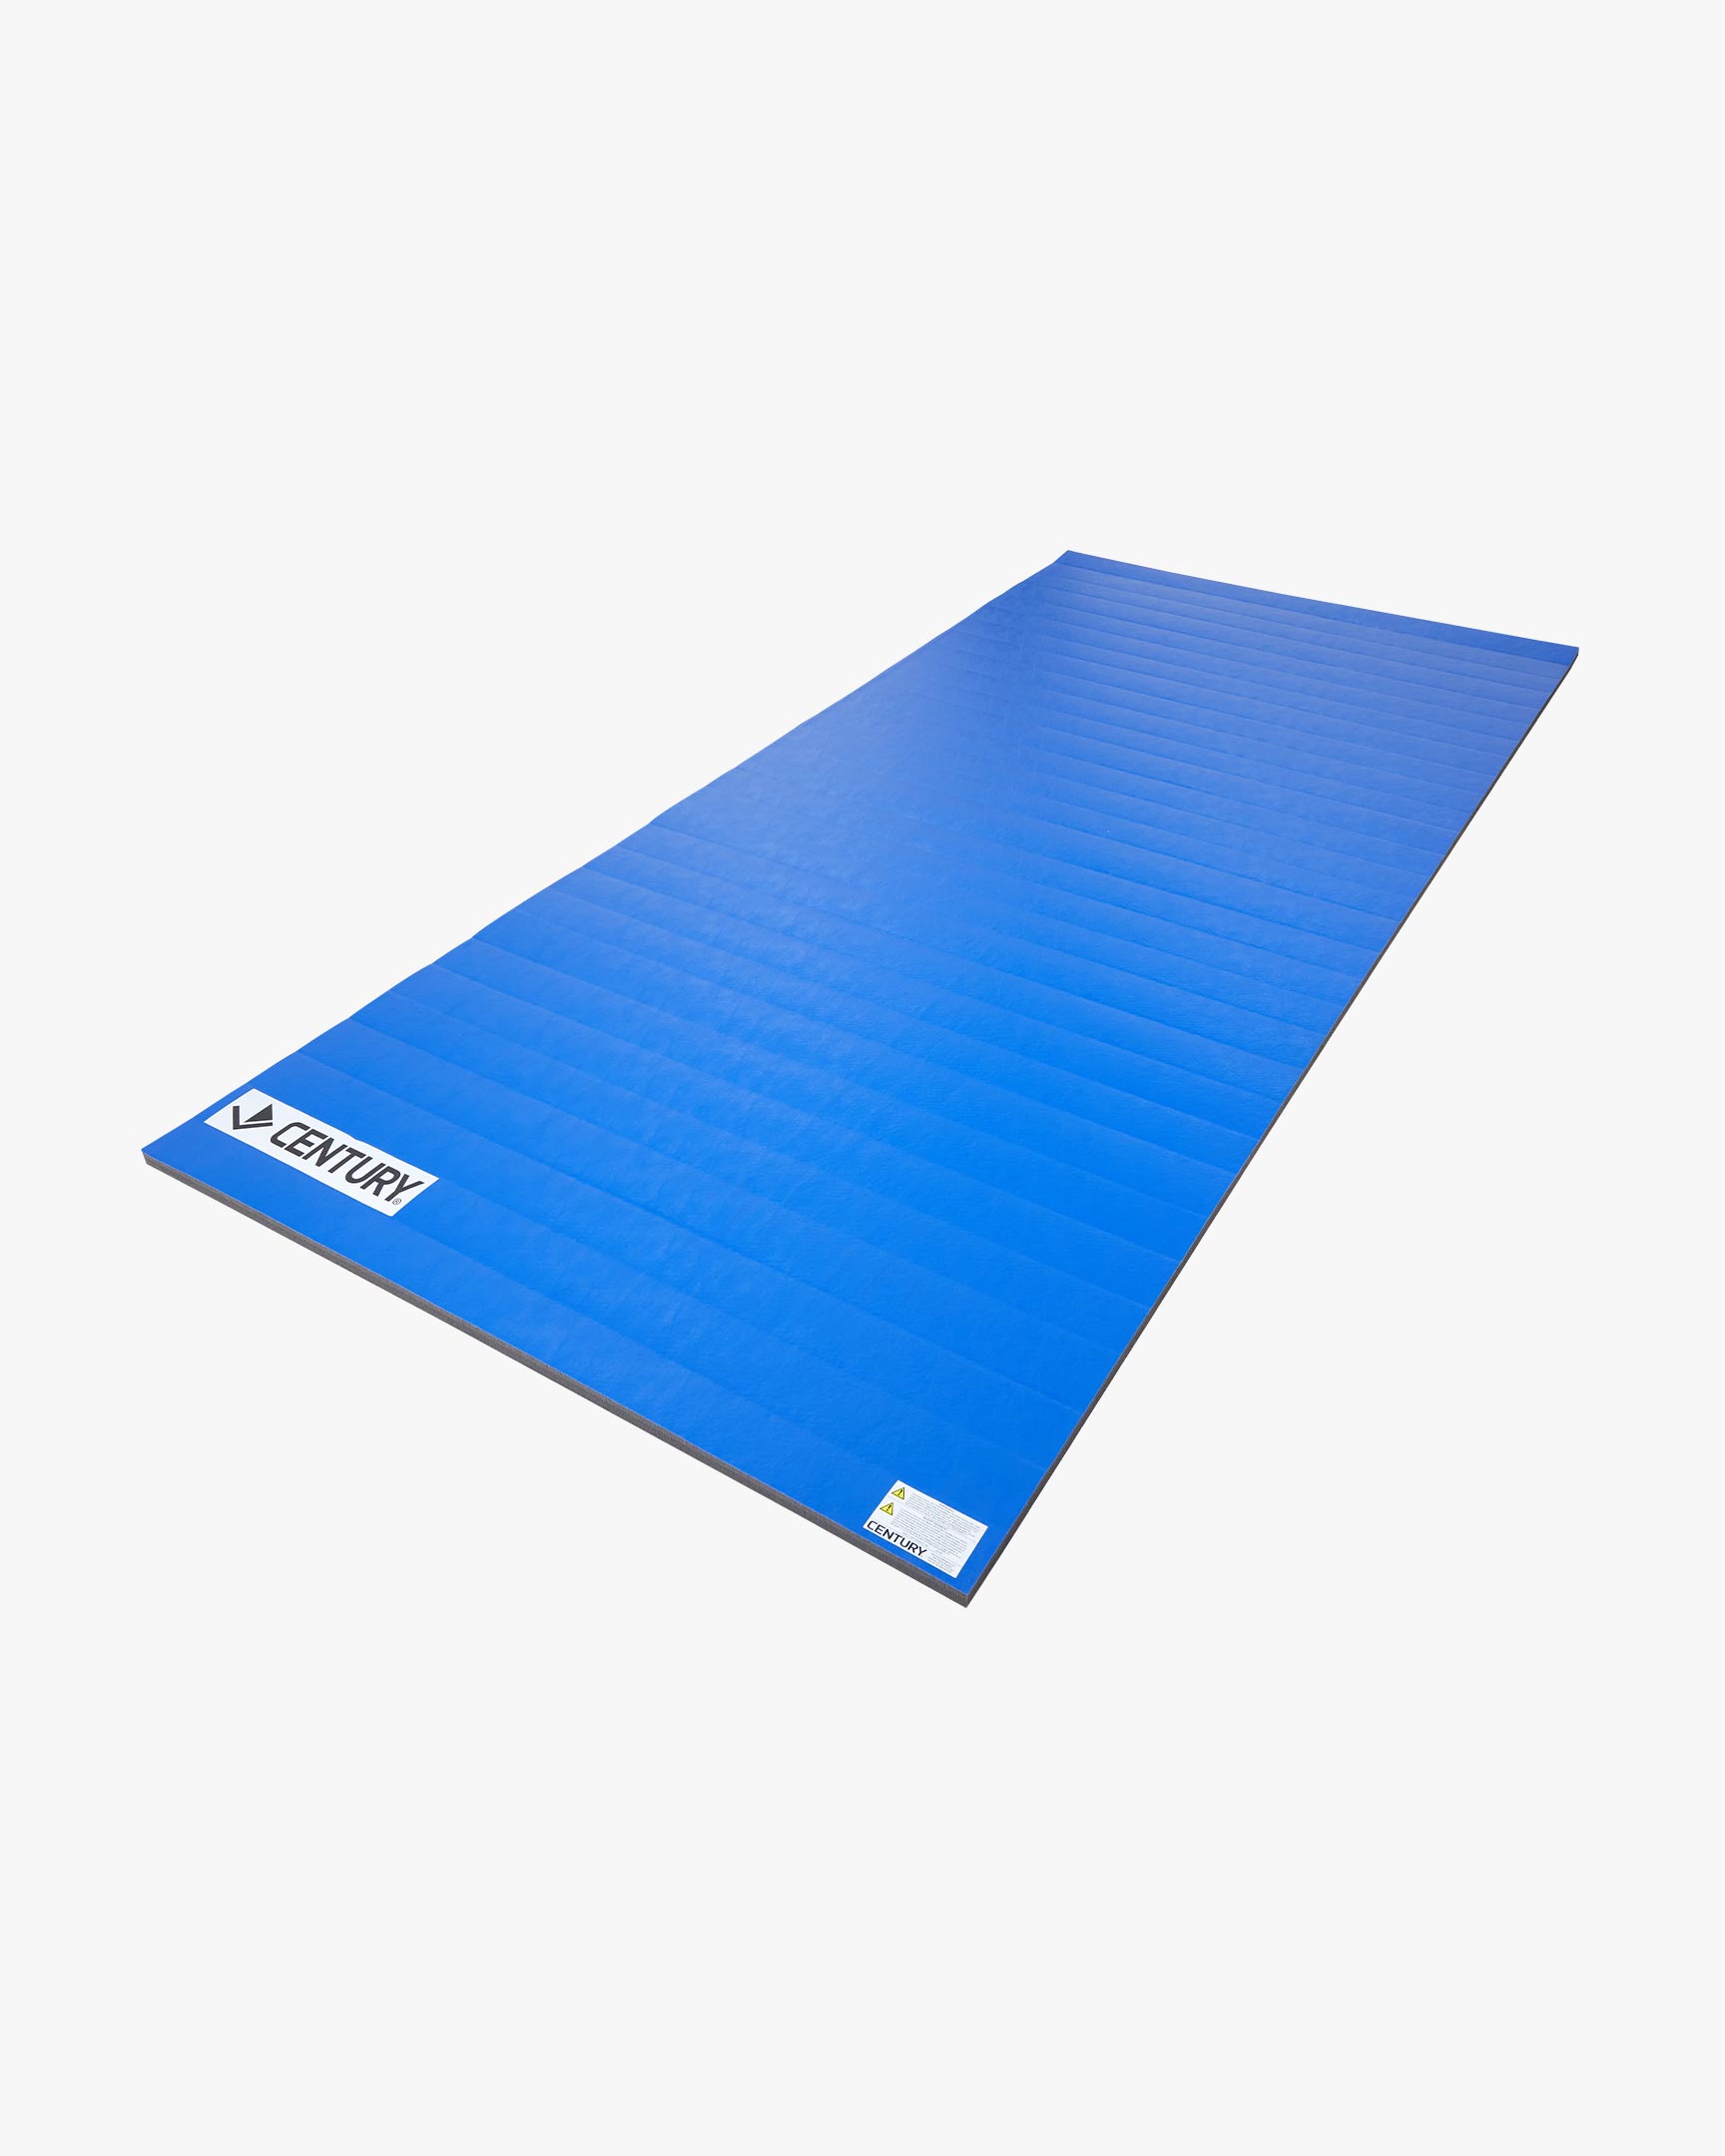 Home Rollout Mat - 5ft x 10ft x 1.25in